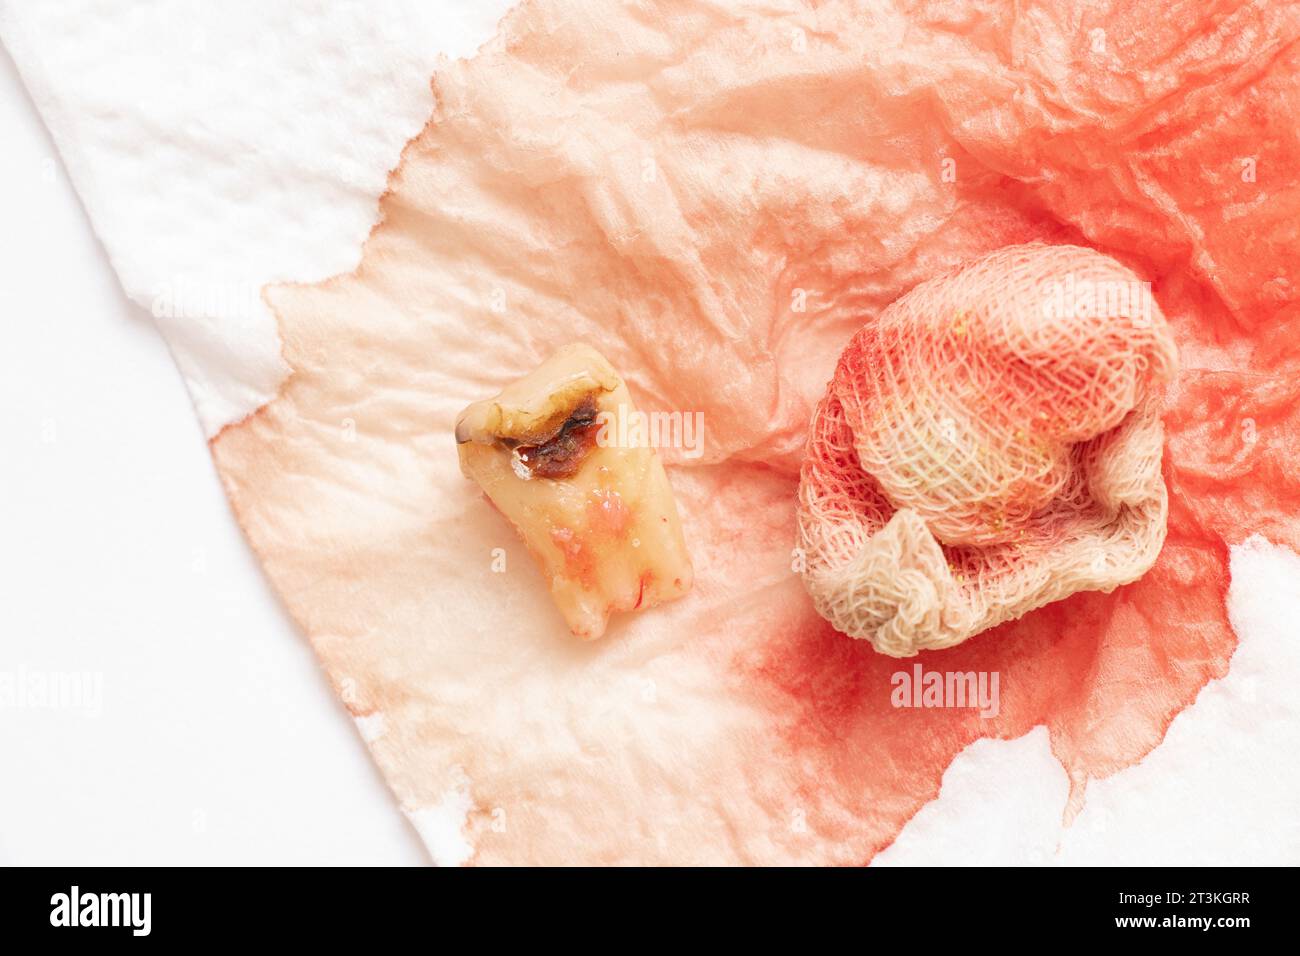 An extracted tooth with a black hole in the middle of the tooth, close-up against the background of a bandage with blood, a sick tooth after extractio Stock Photo